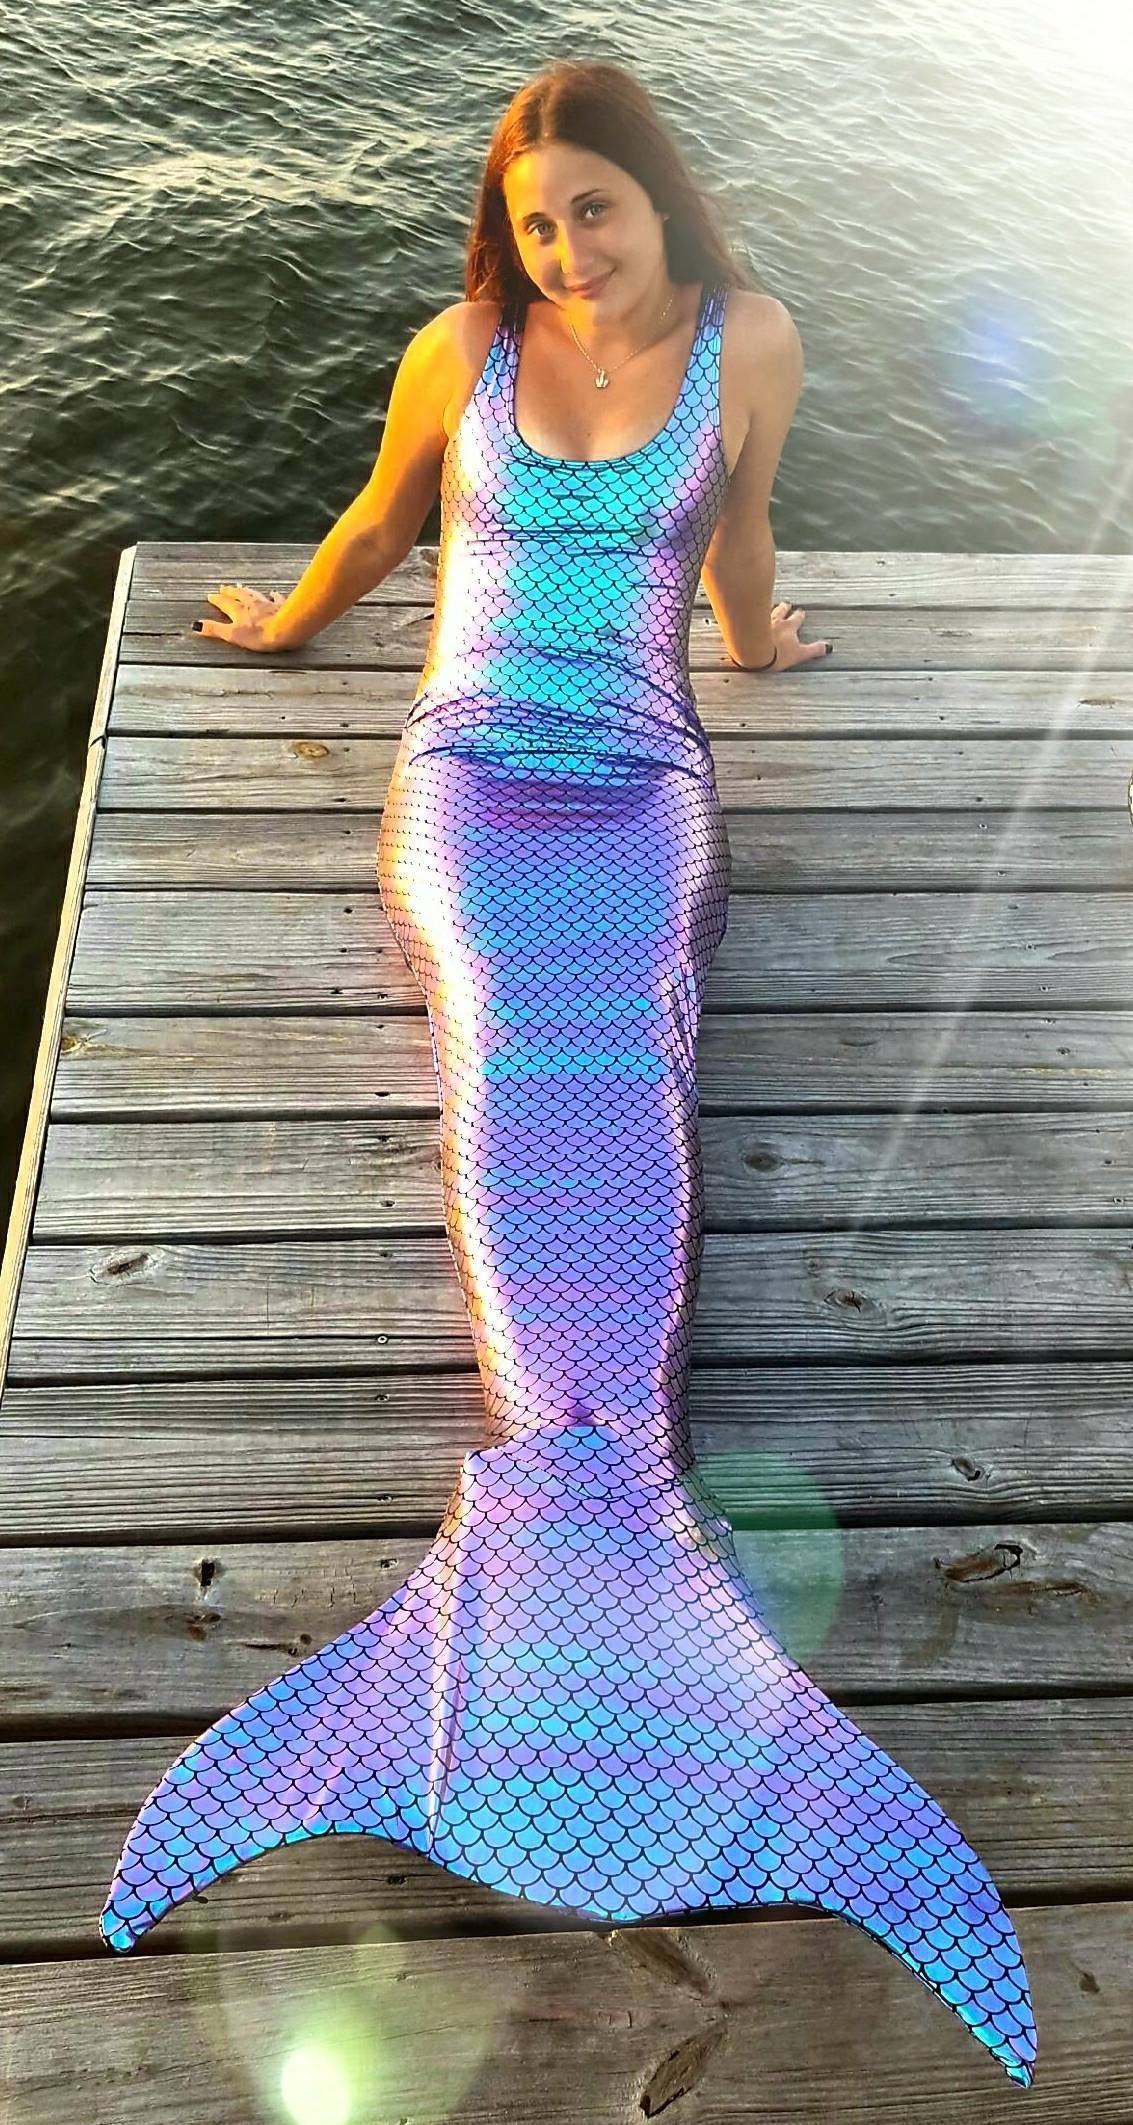 Mermaid Tail  Walkable/Swimmable with Invisible Zipper Bottom !Add Monofin/Add Bathing Suit!!*** FAST SHIPPING!!